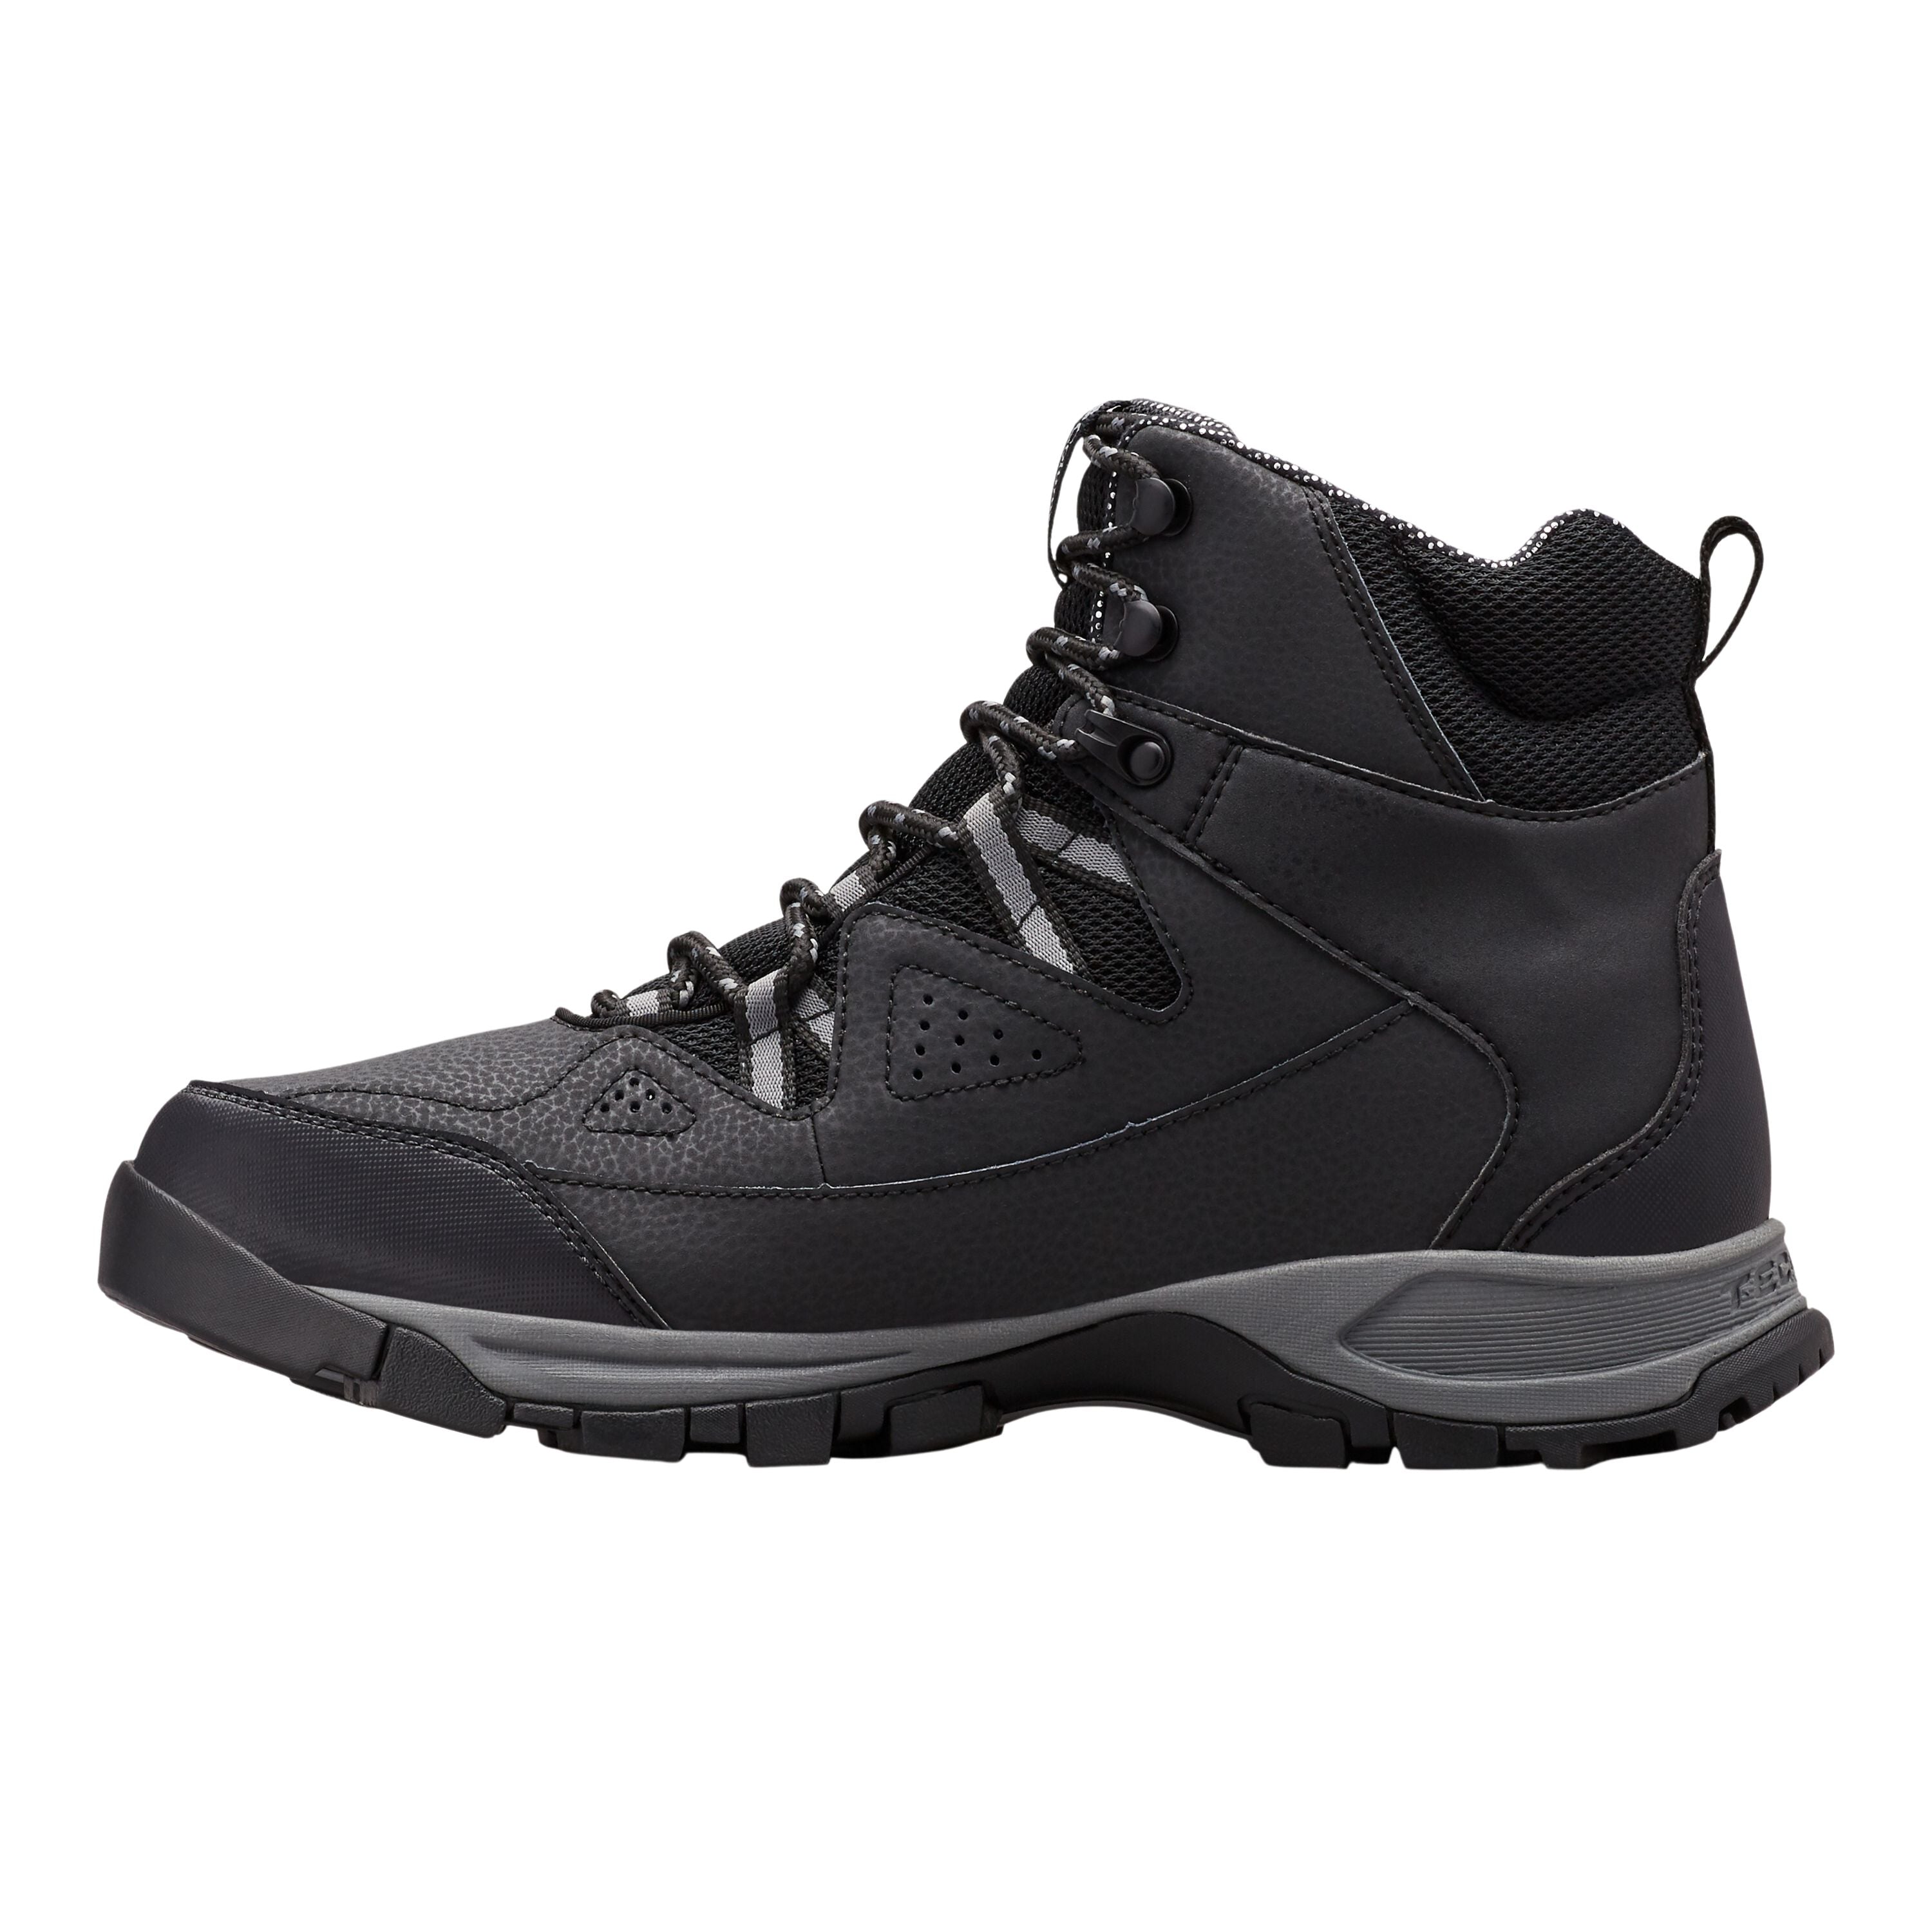 Bottes isolées "Liftop™ III" - Homme